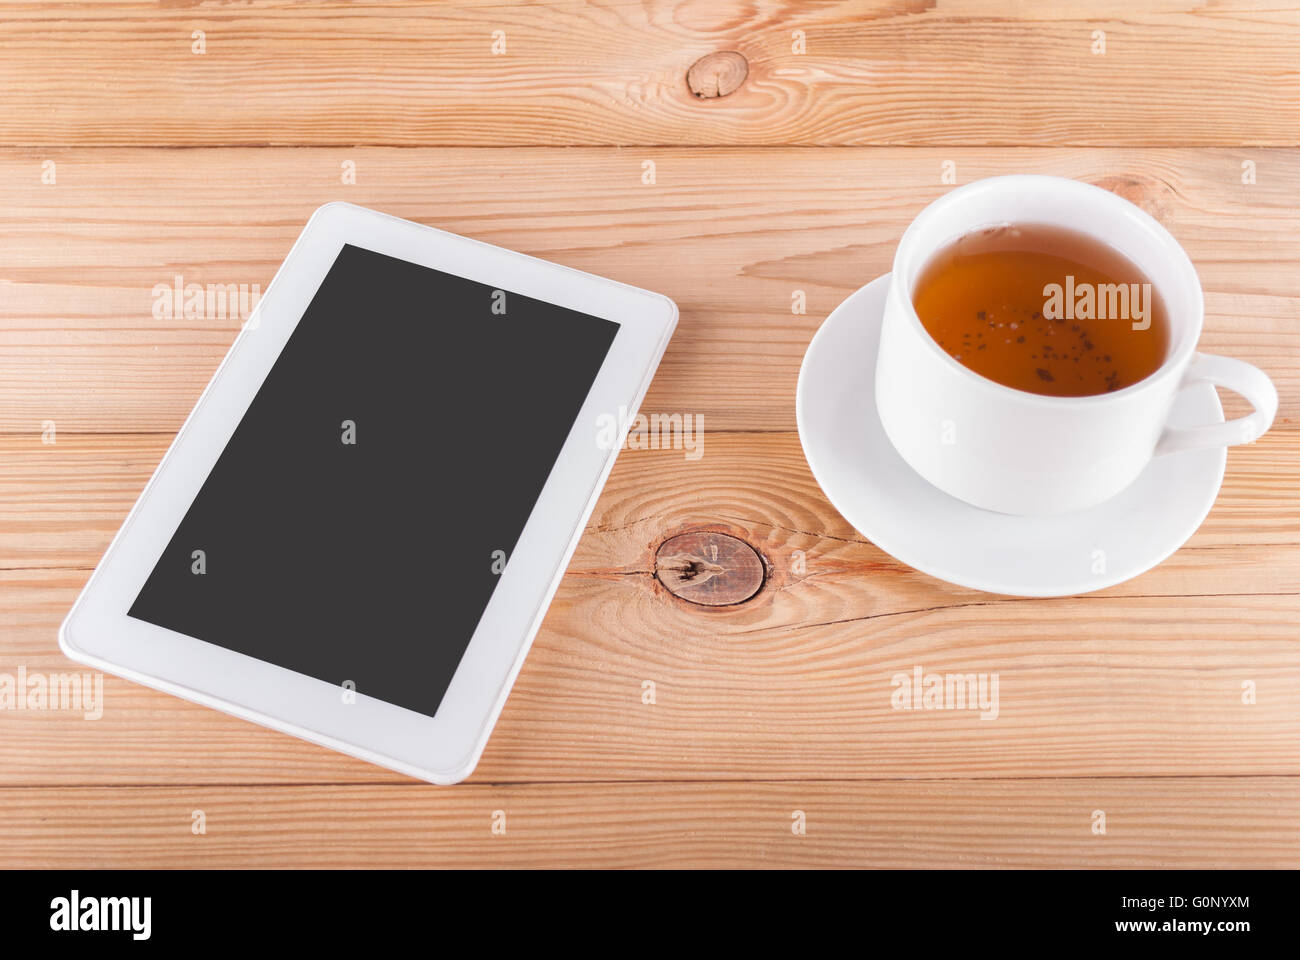 Tablet computer and a cup of tea on a wooden table. Stock Photo